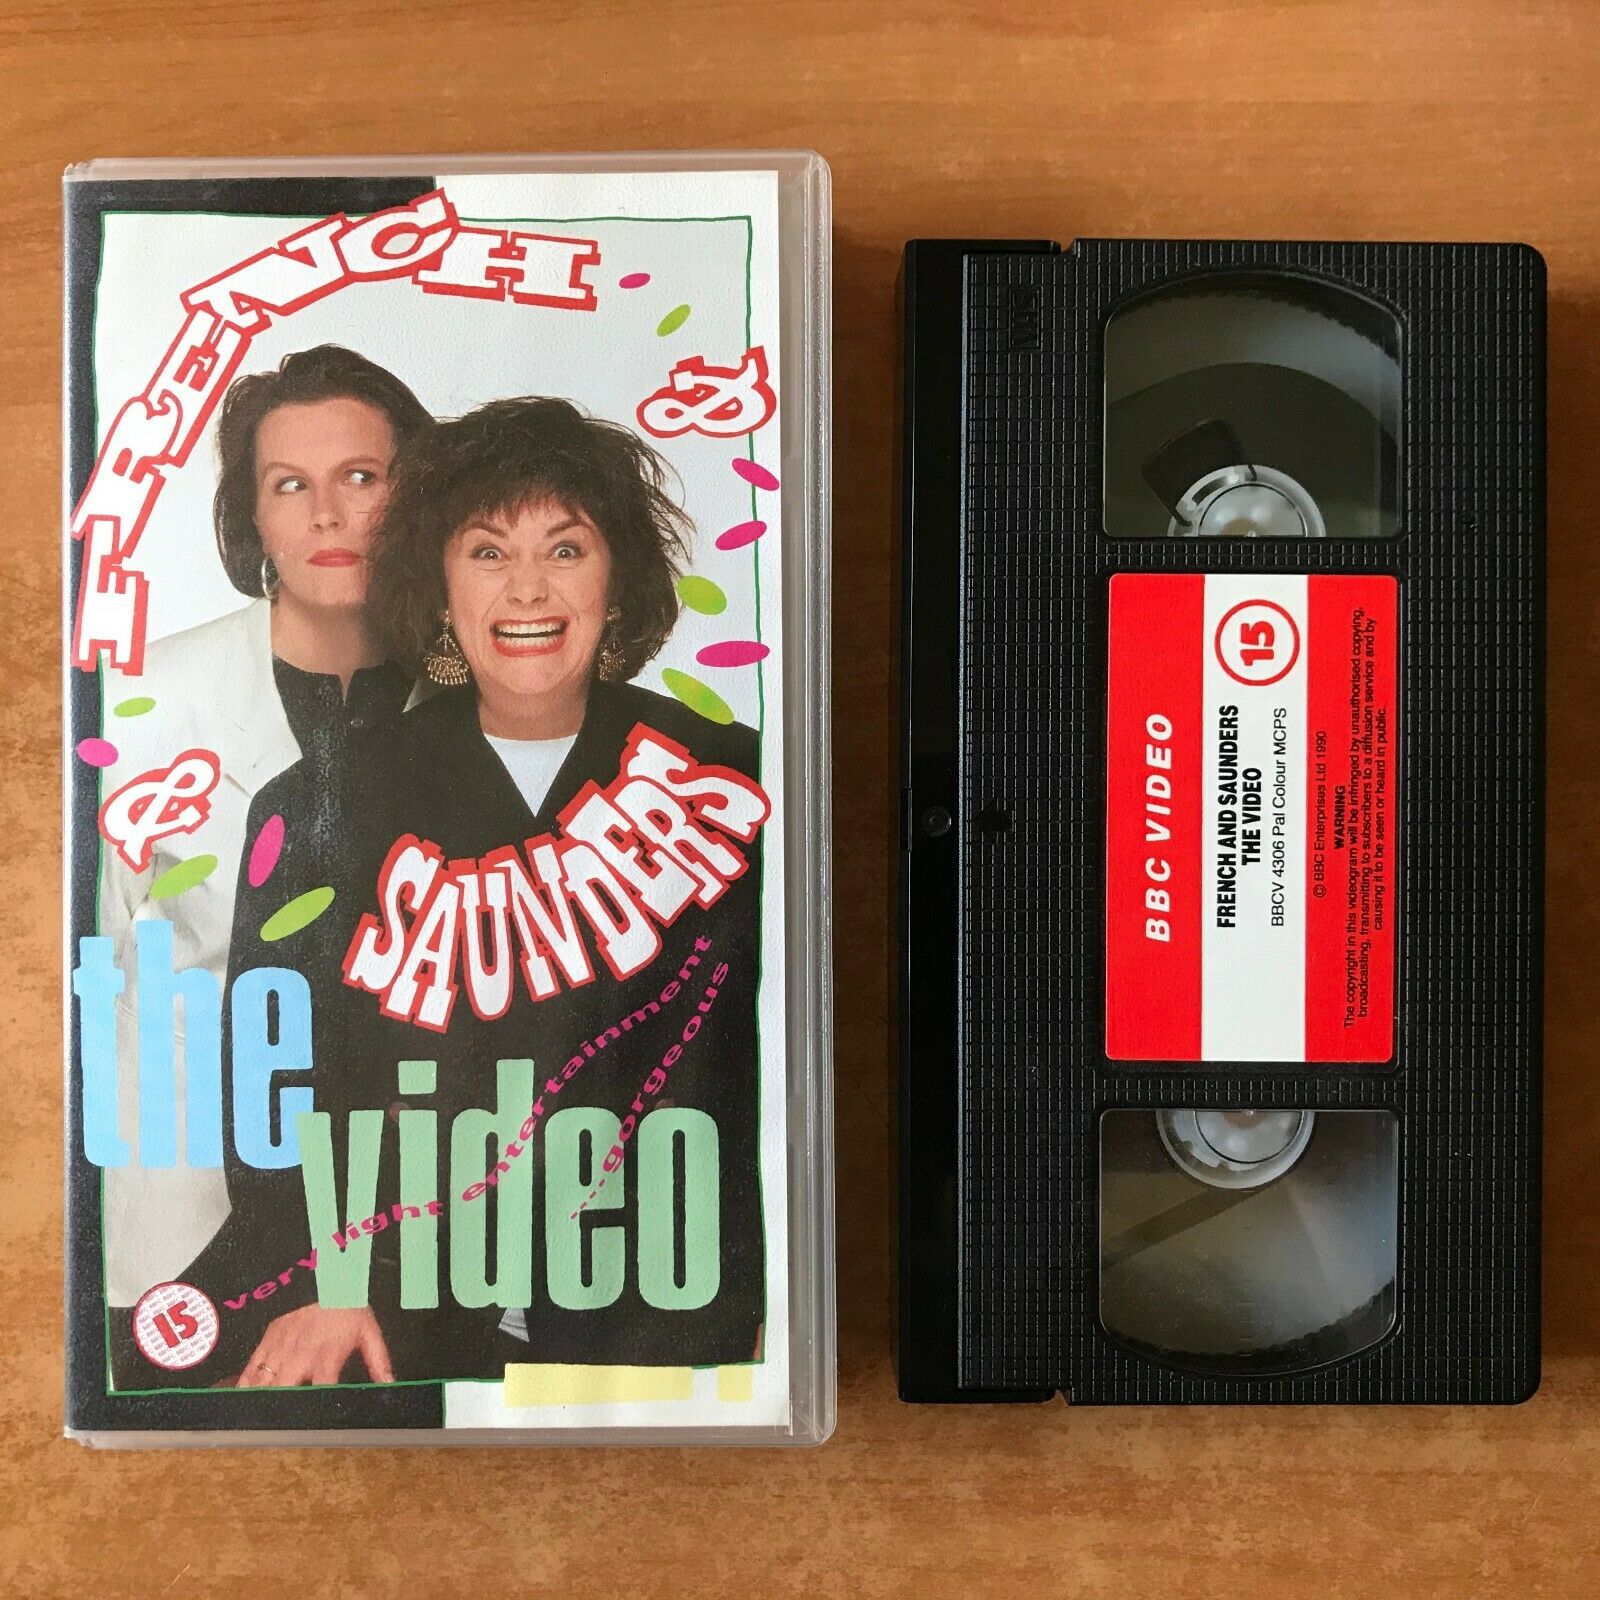 French & Saunders, The Video BBC Comedy, Simon Brint / Lenny Henry